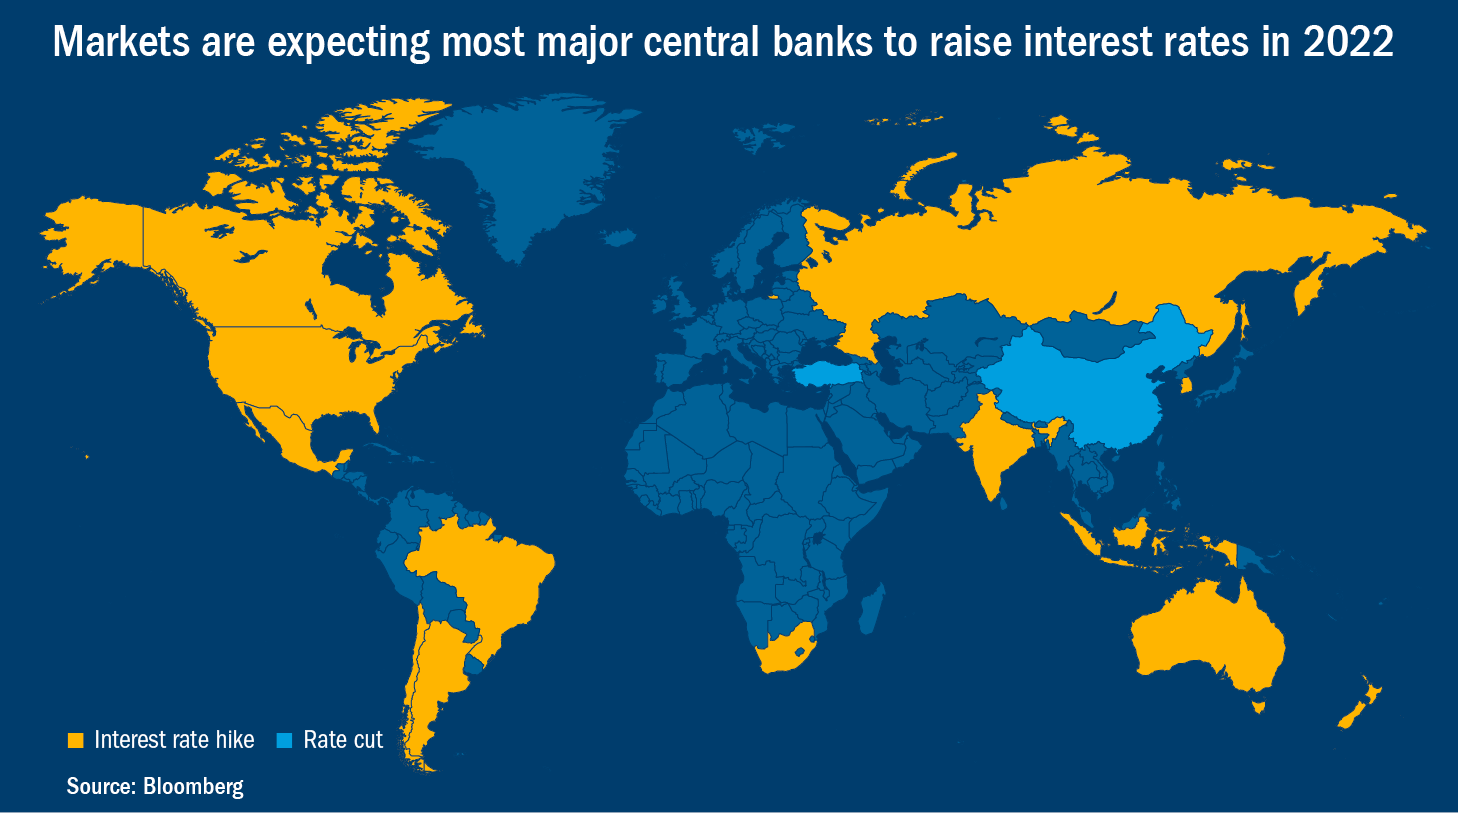 Map of the world indicating that the central banks of many countries are expected to raise interest rates.